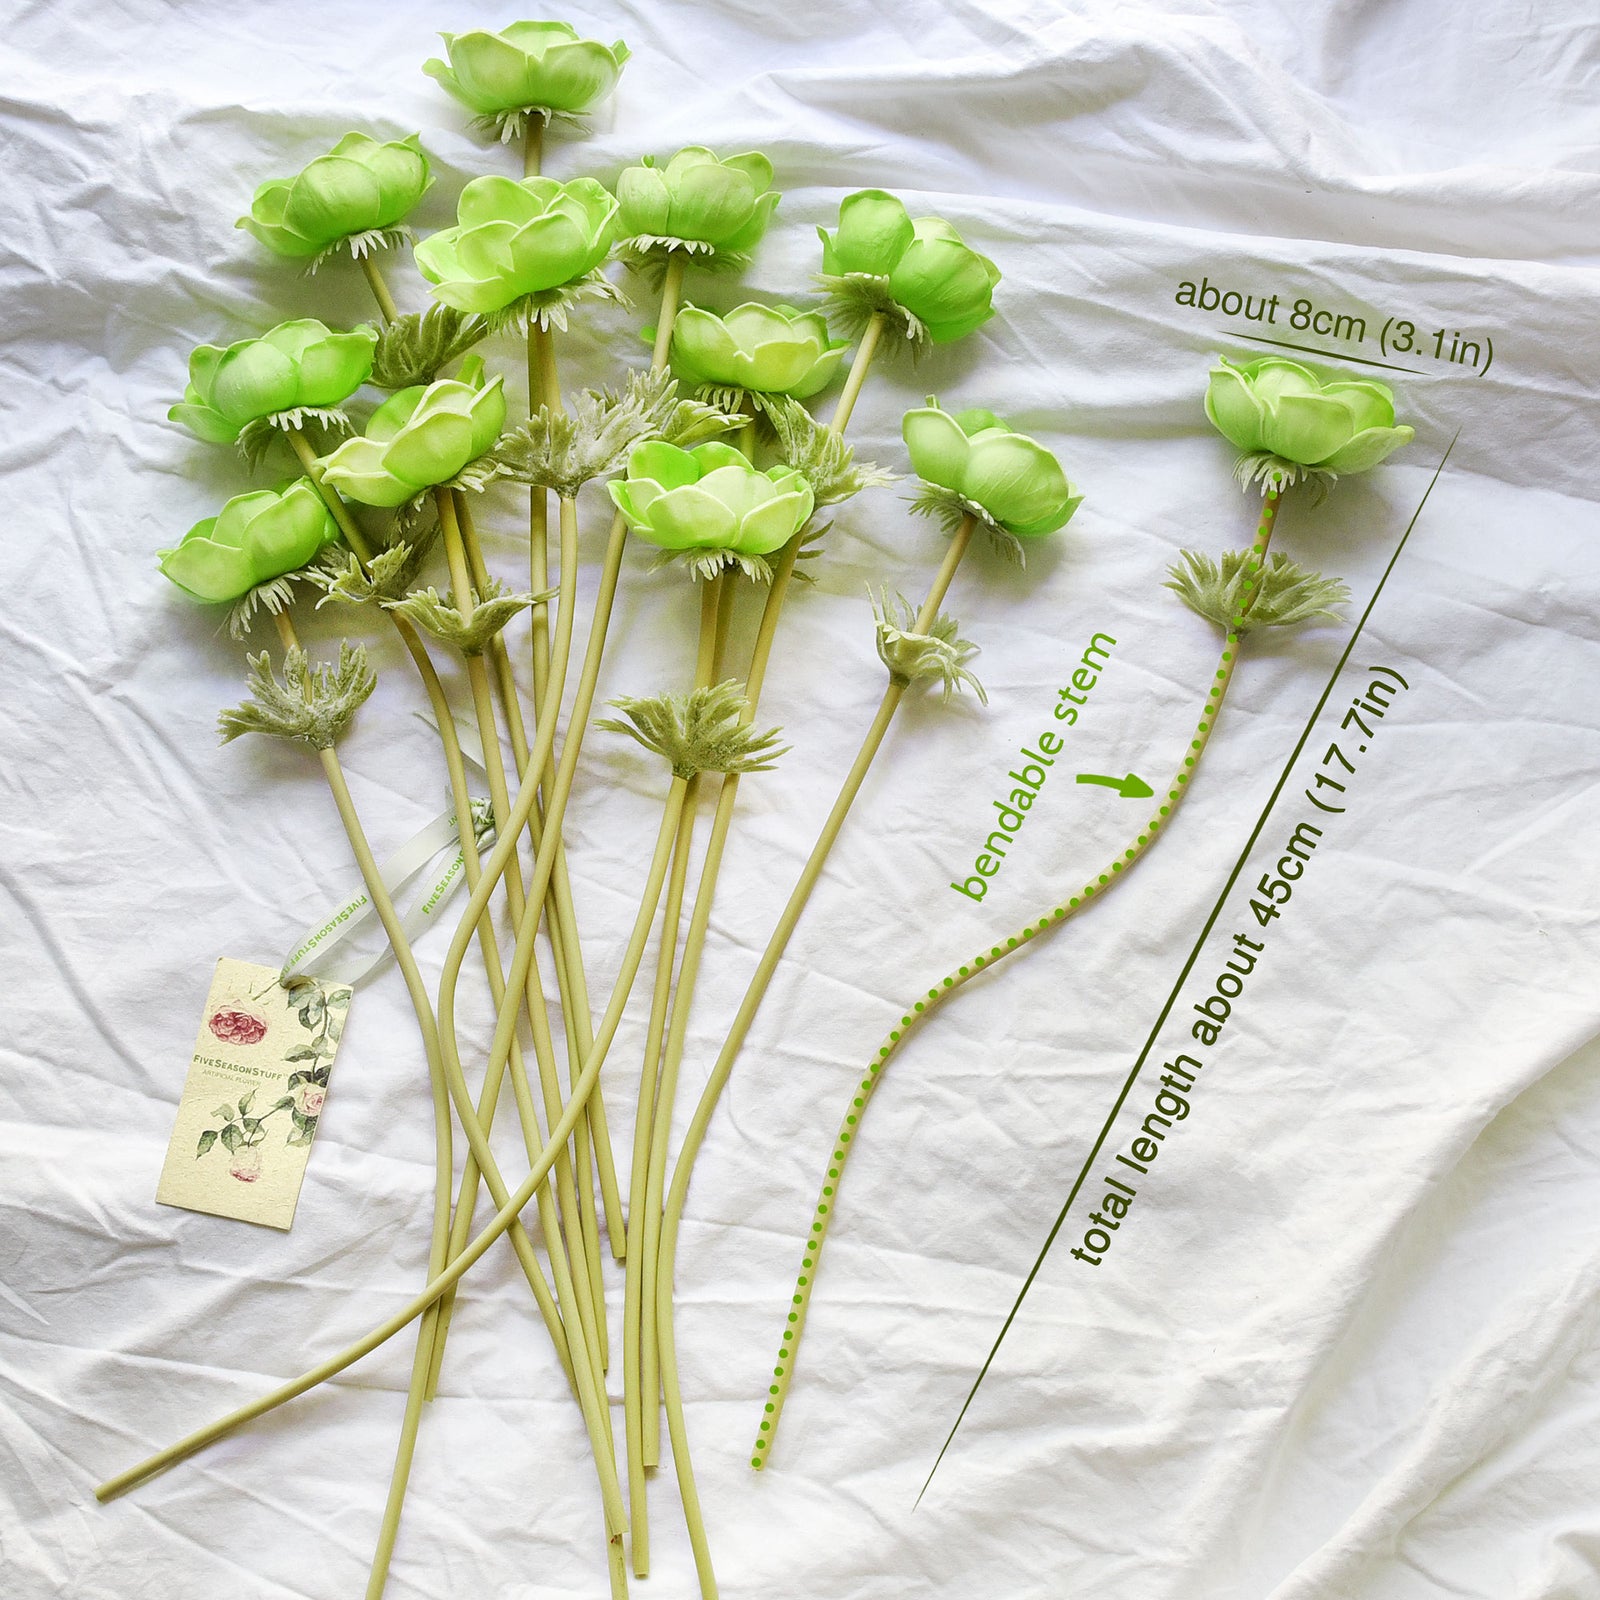 12 Long Stems of ‘Real Touch’ Artificial (Green) Anemone Flowers, Wedding Bouquet Flower Arrangement, 45cm (17.7 inches)